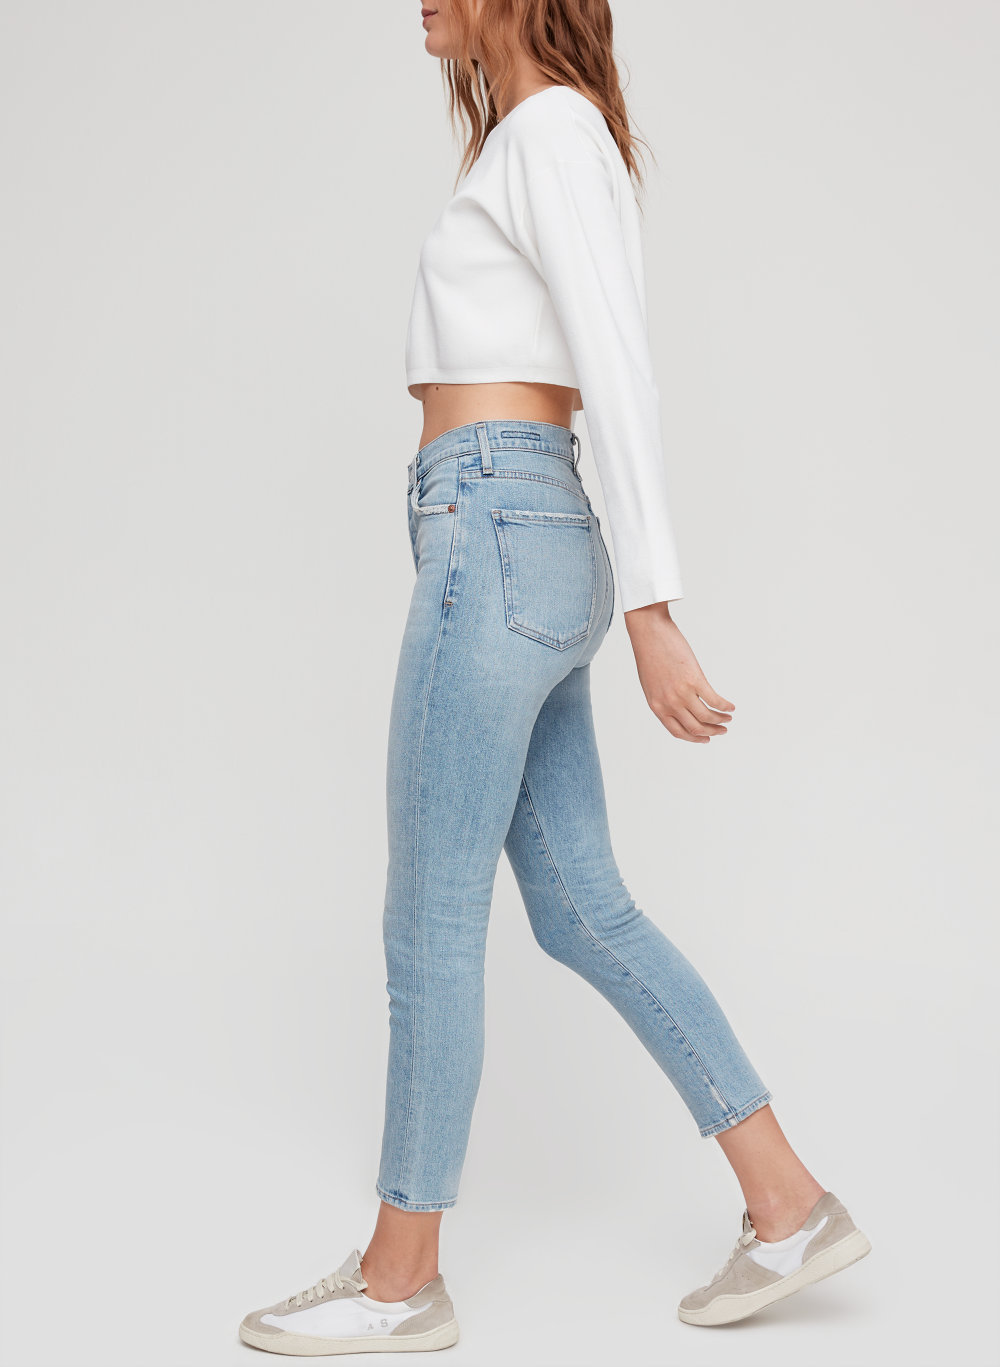 citizens of humanity jeans olivia